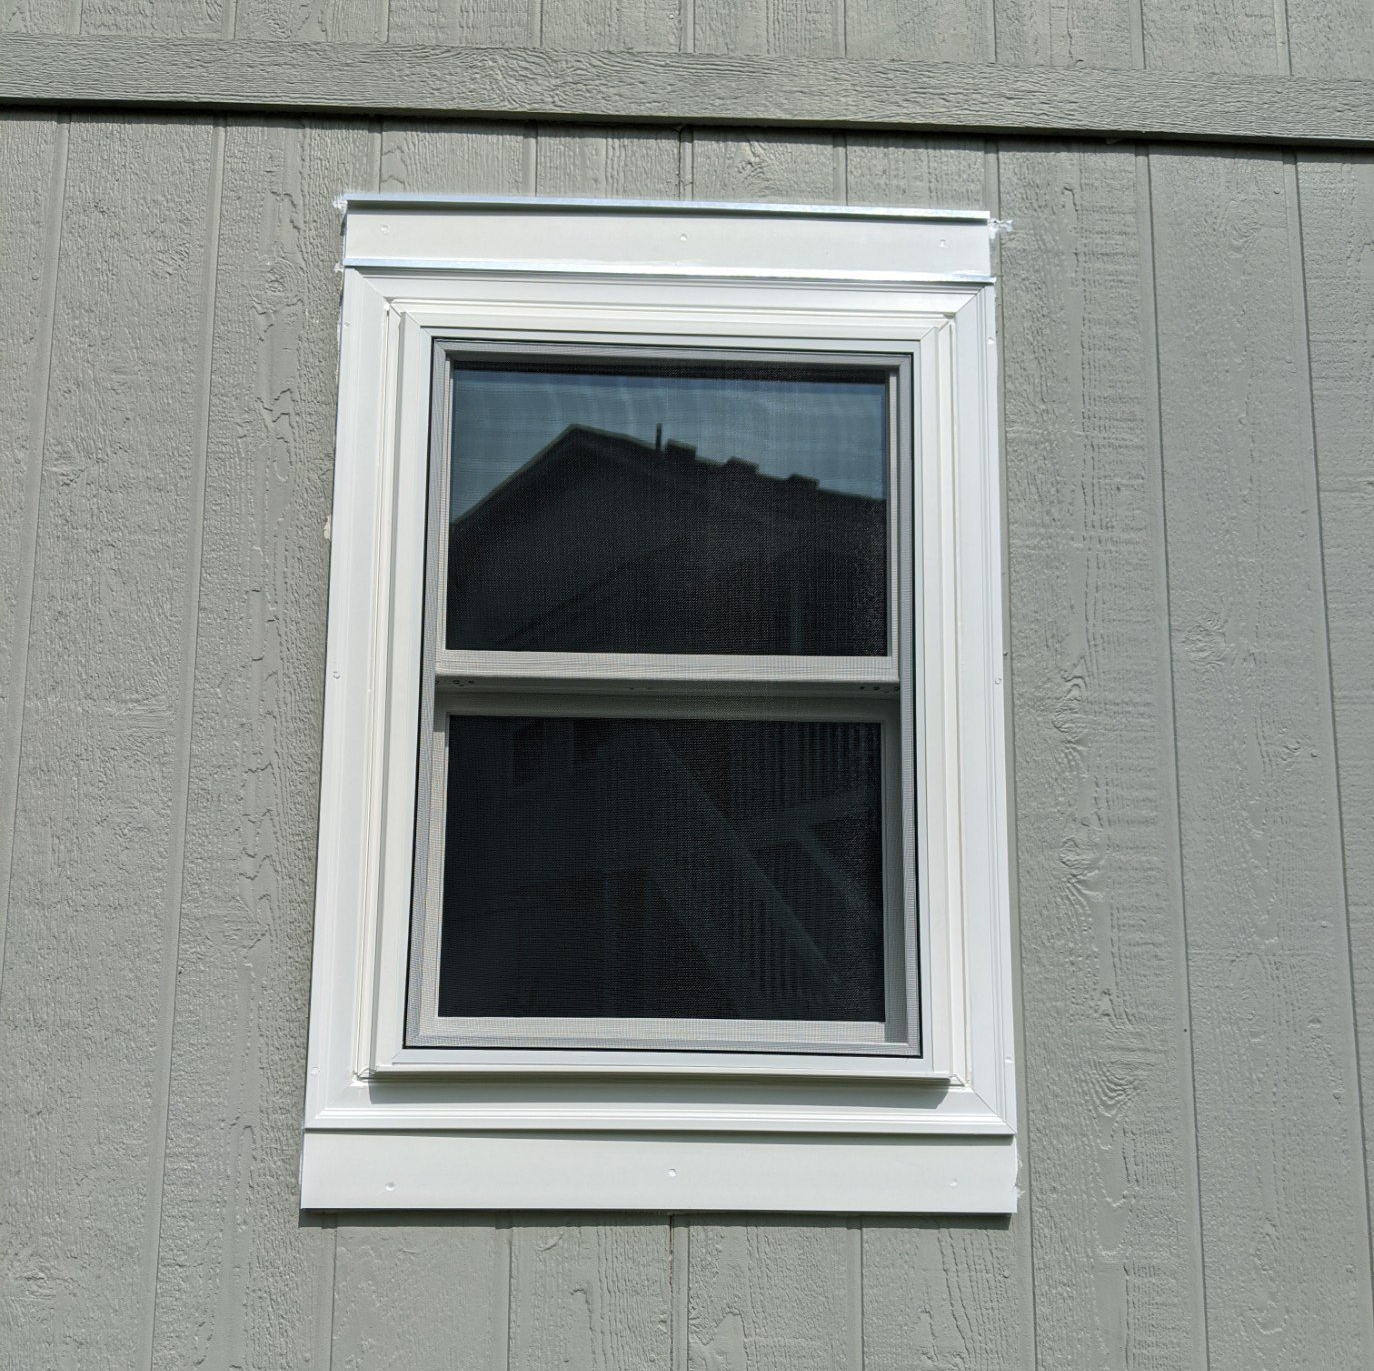 before and after photo of new window to replace old broken window